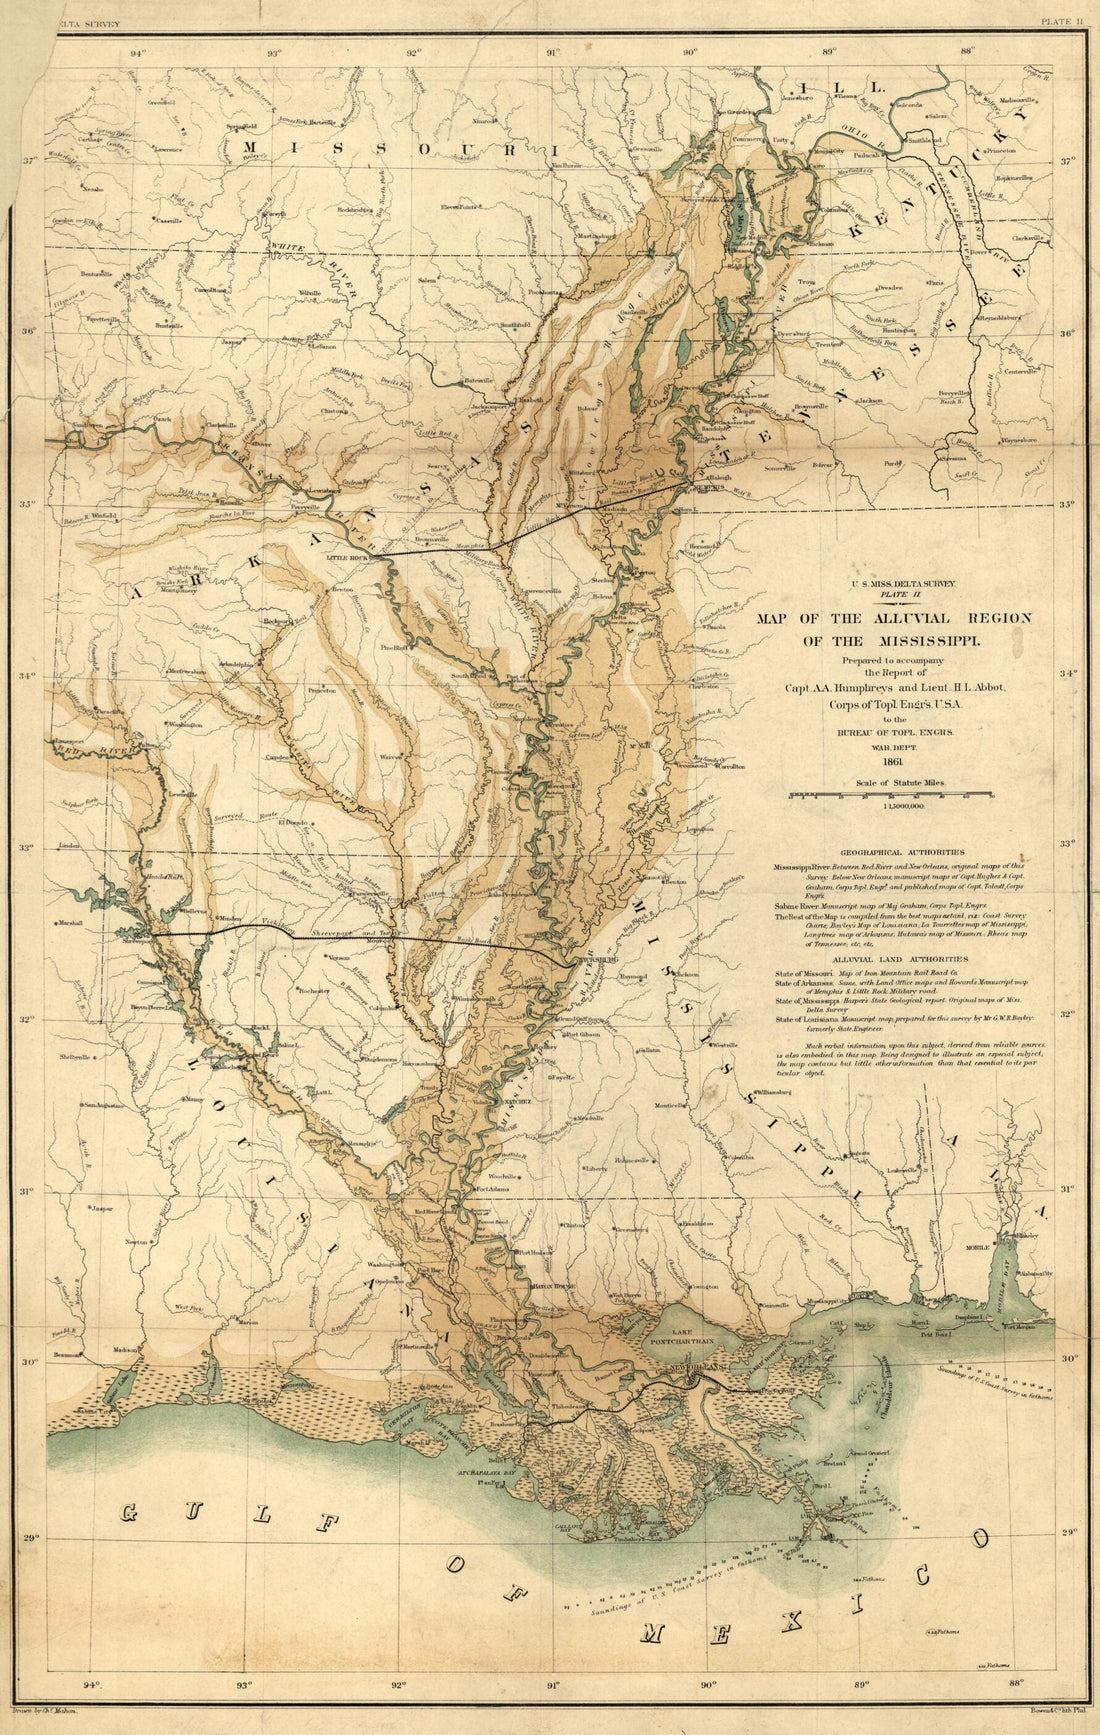 This old map of Map of the Alluvial Region of the Mississippi from 1861 was created by Charles Mahon in 1861